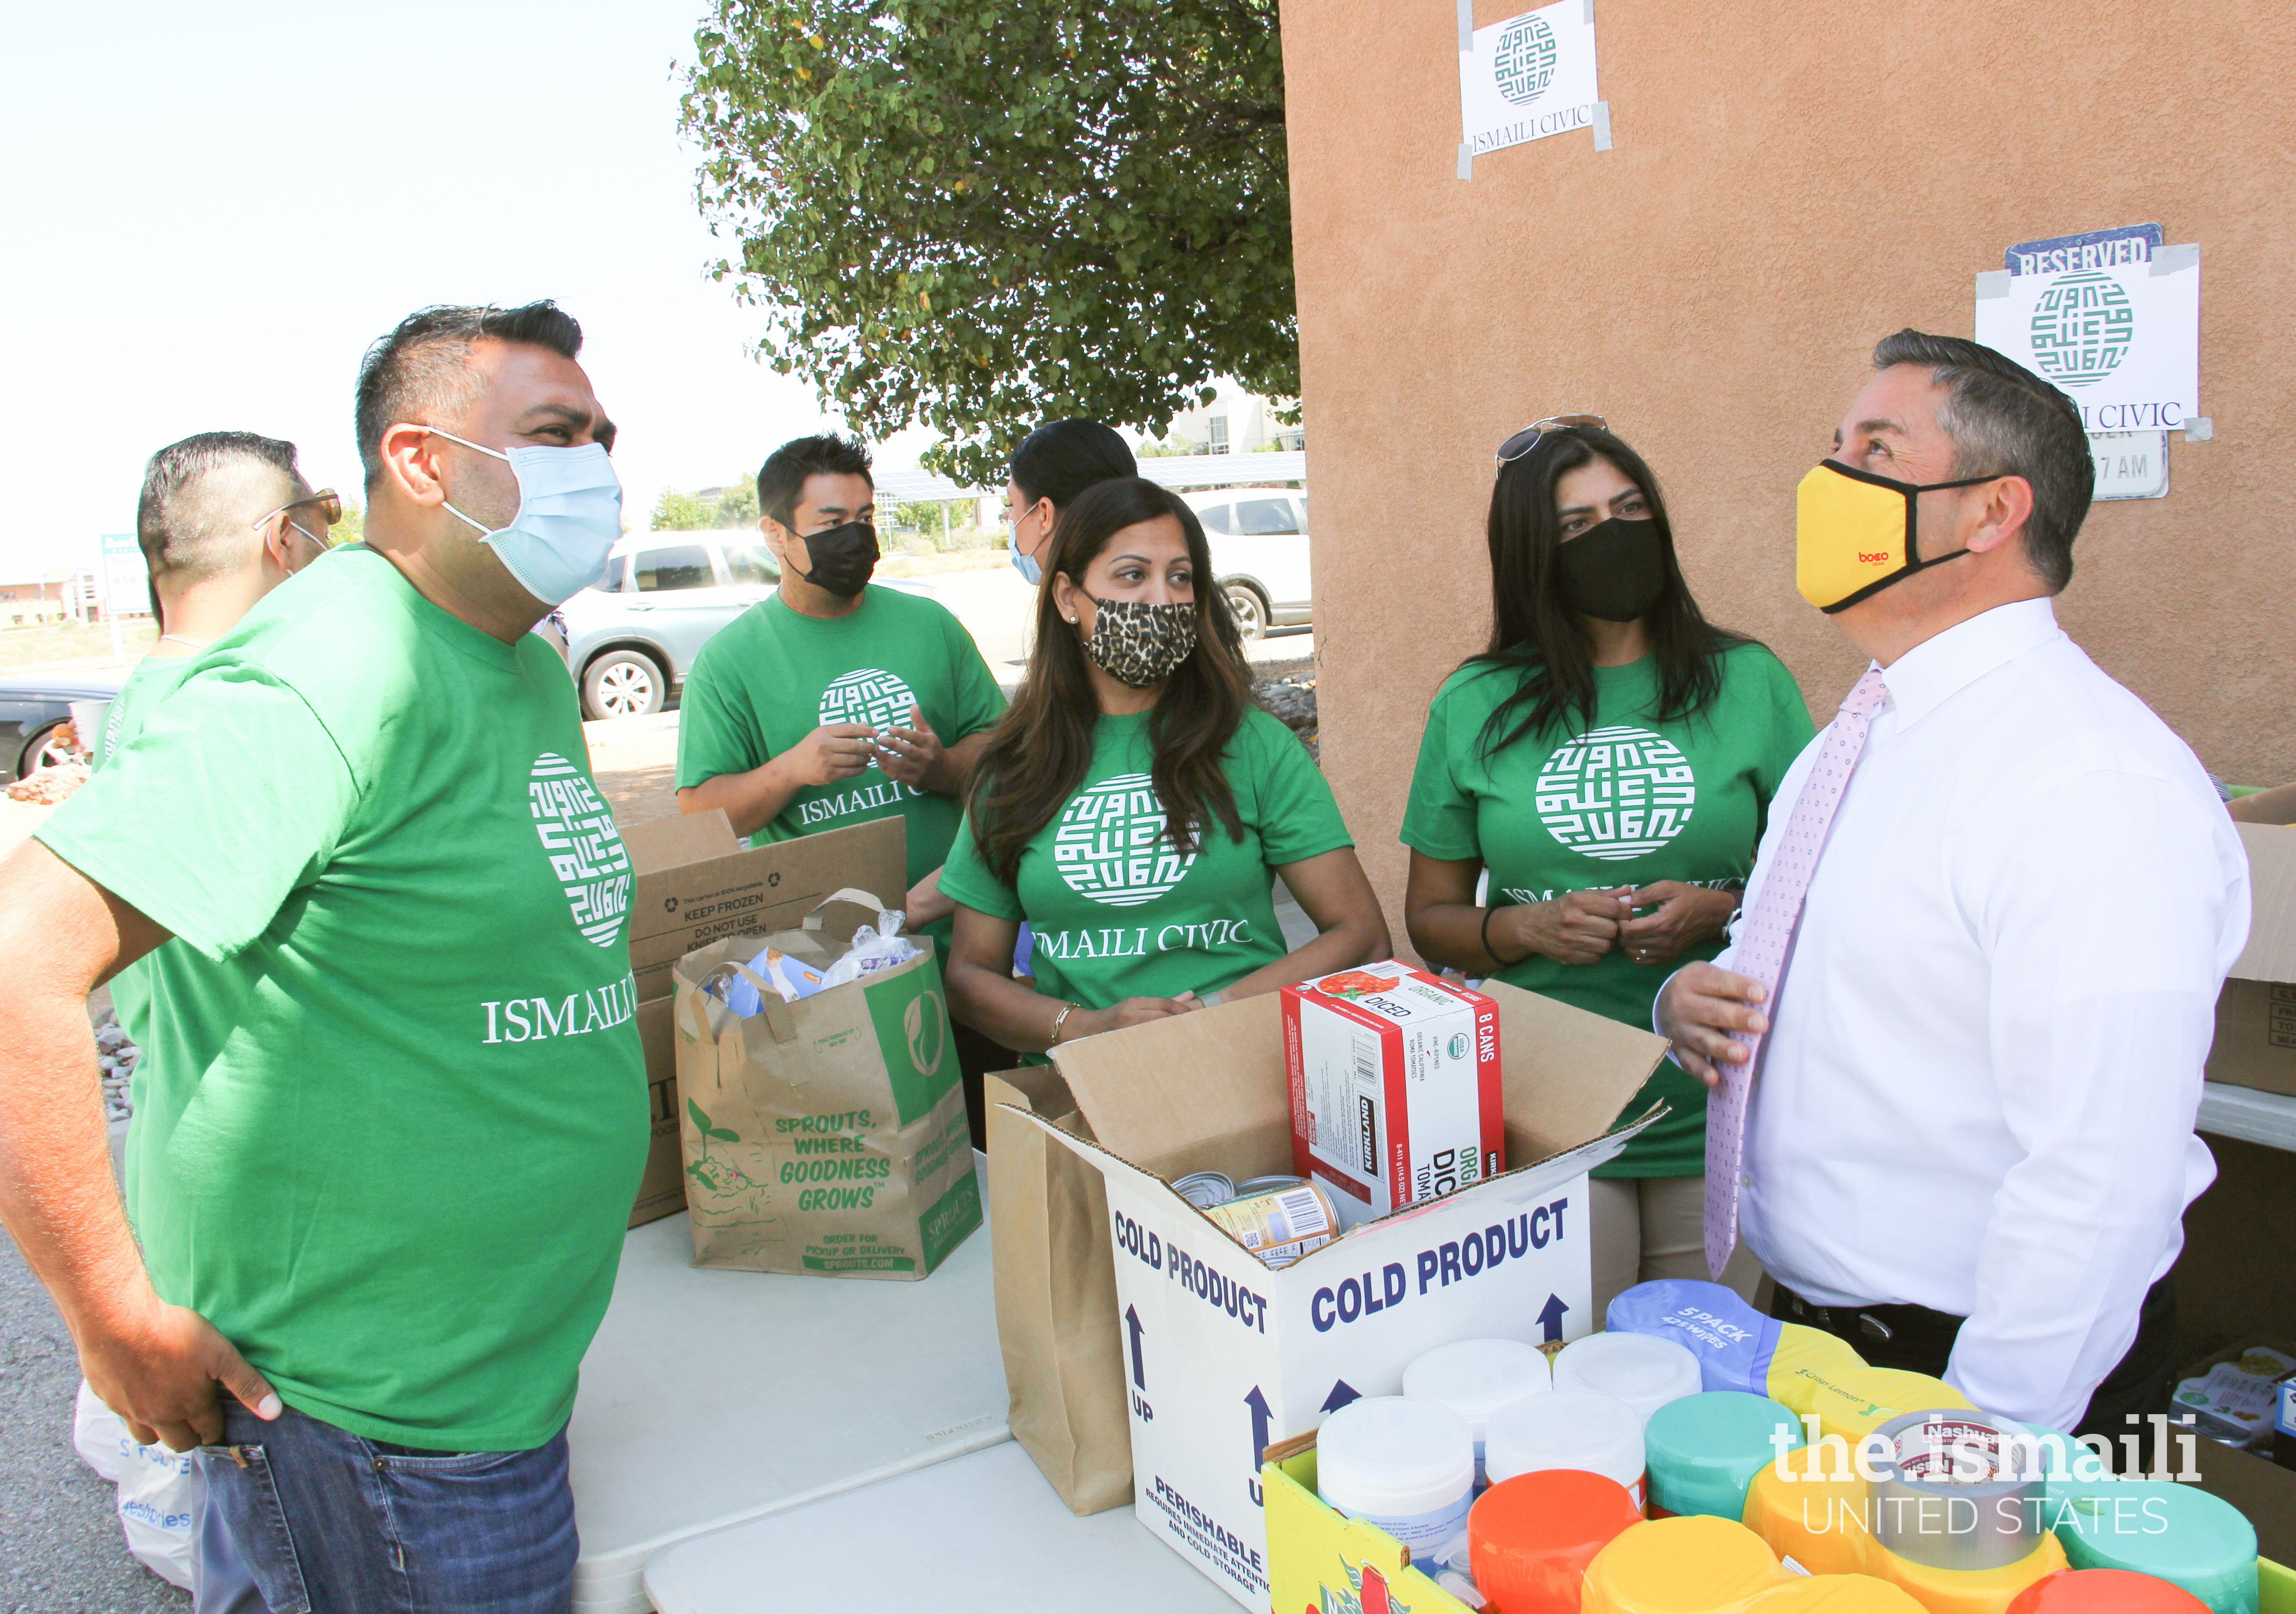 New Mexico Senator Ben Ray Lujan with Ismaili CIVIC volunteers at a supplies drive for Afghan refugees in Albuquerque.